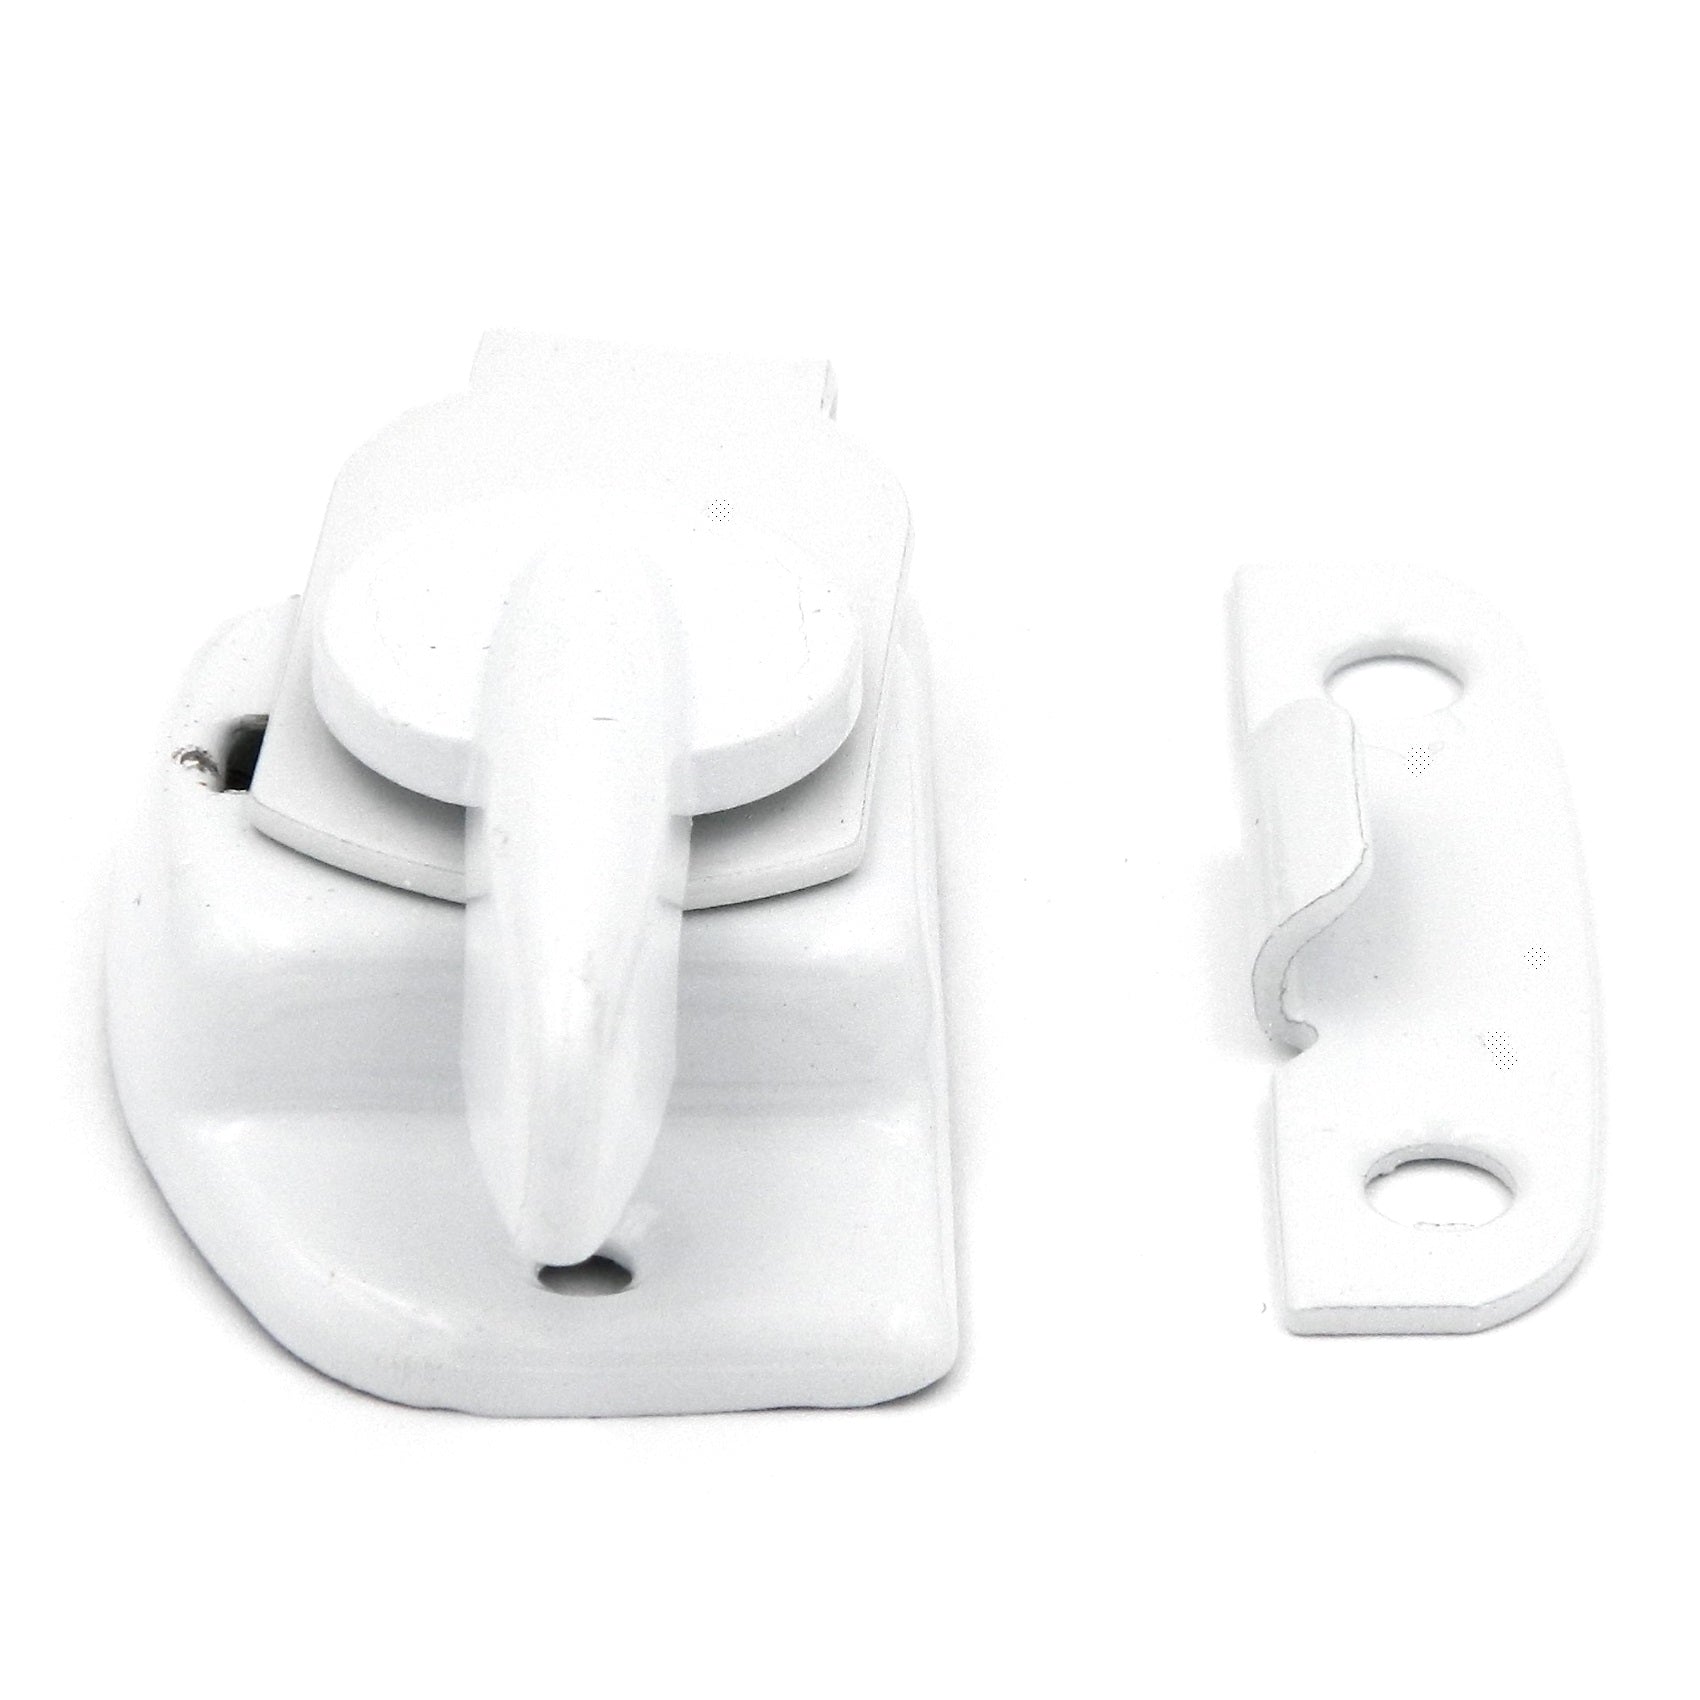 P1443 White 2 1/4" Clamp-Tight Window Sash Lock Belwith Hardware Products